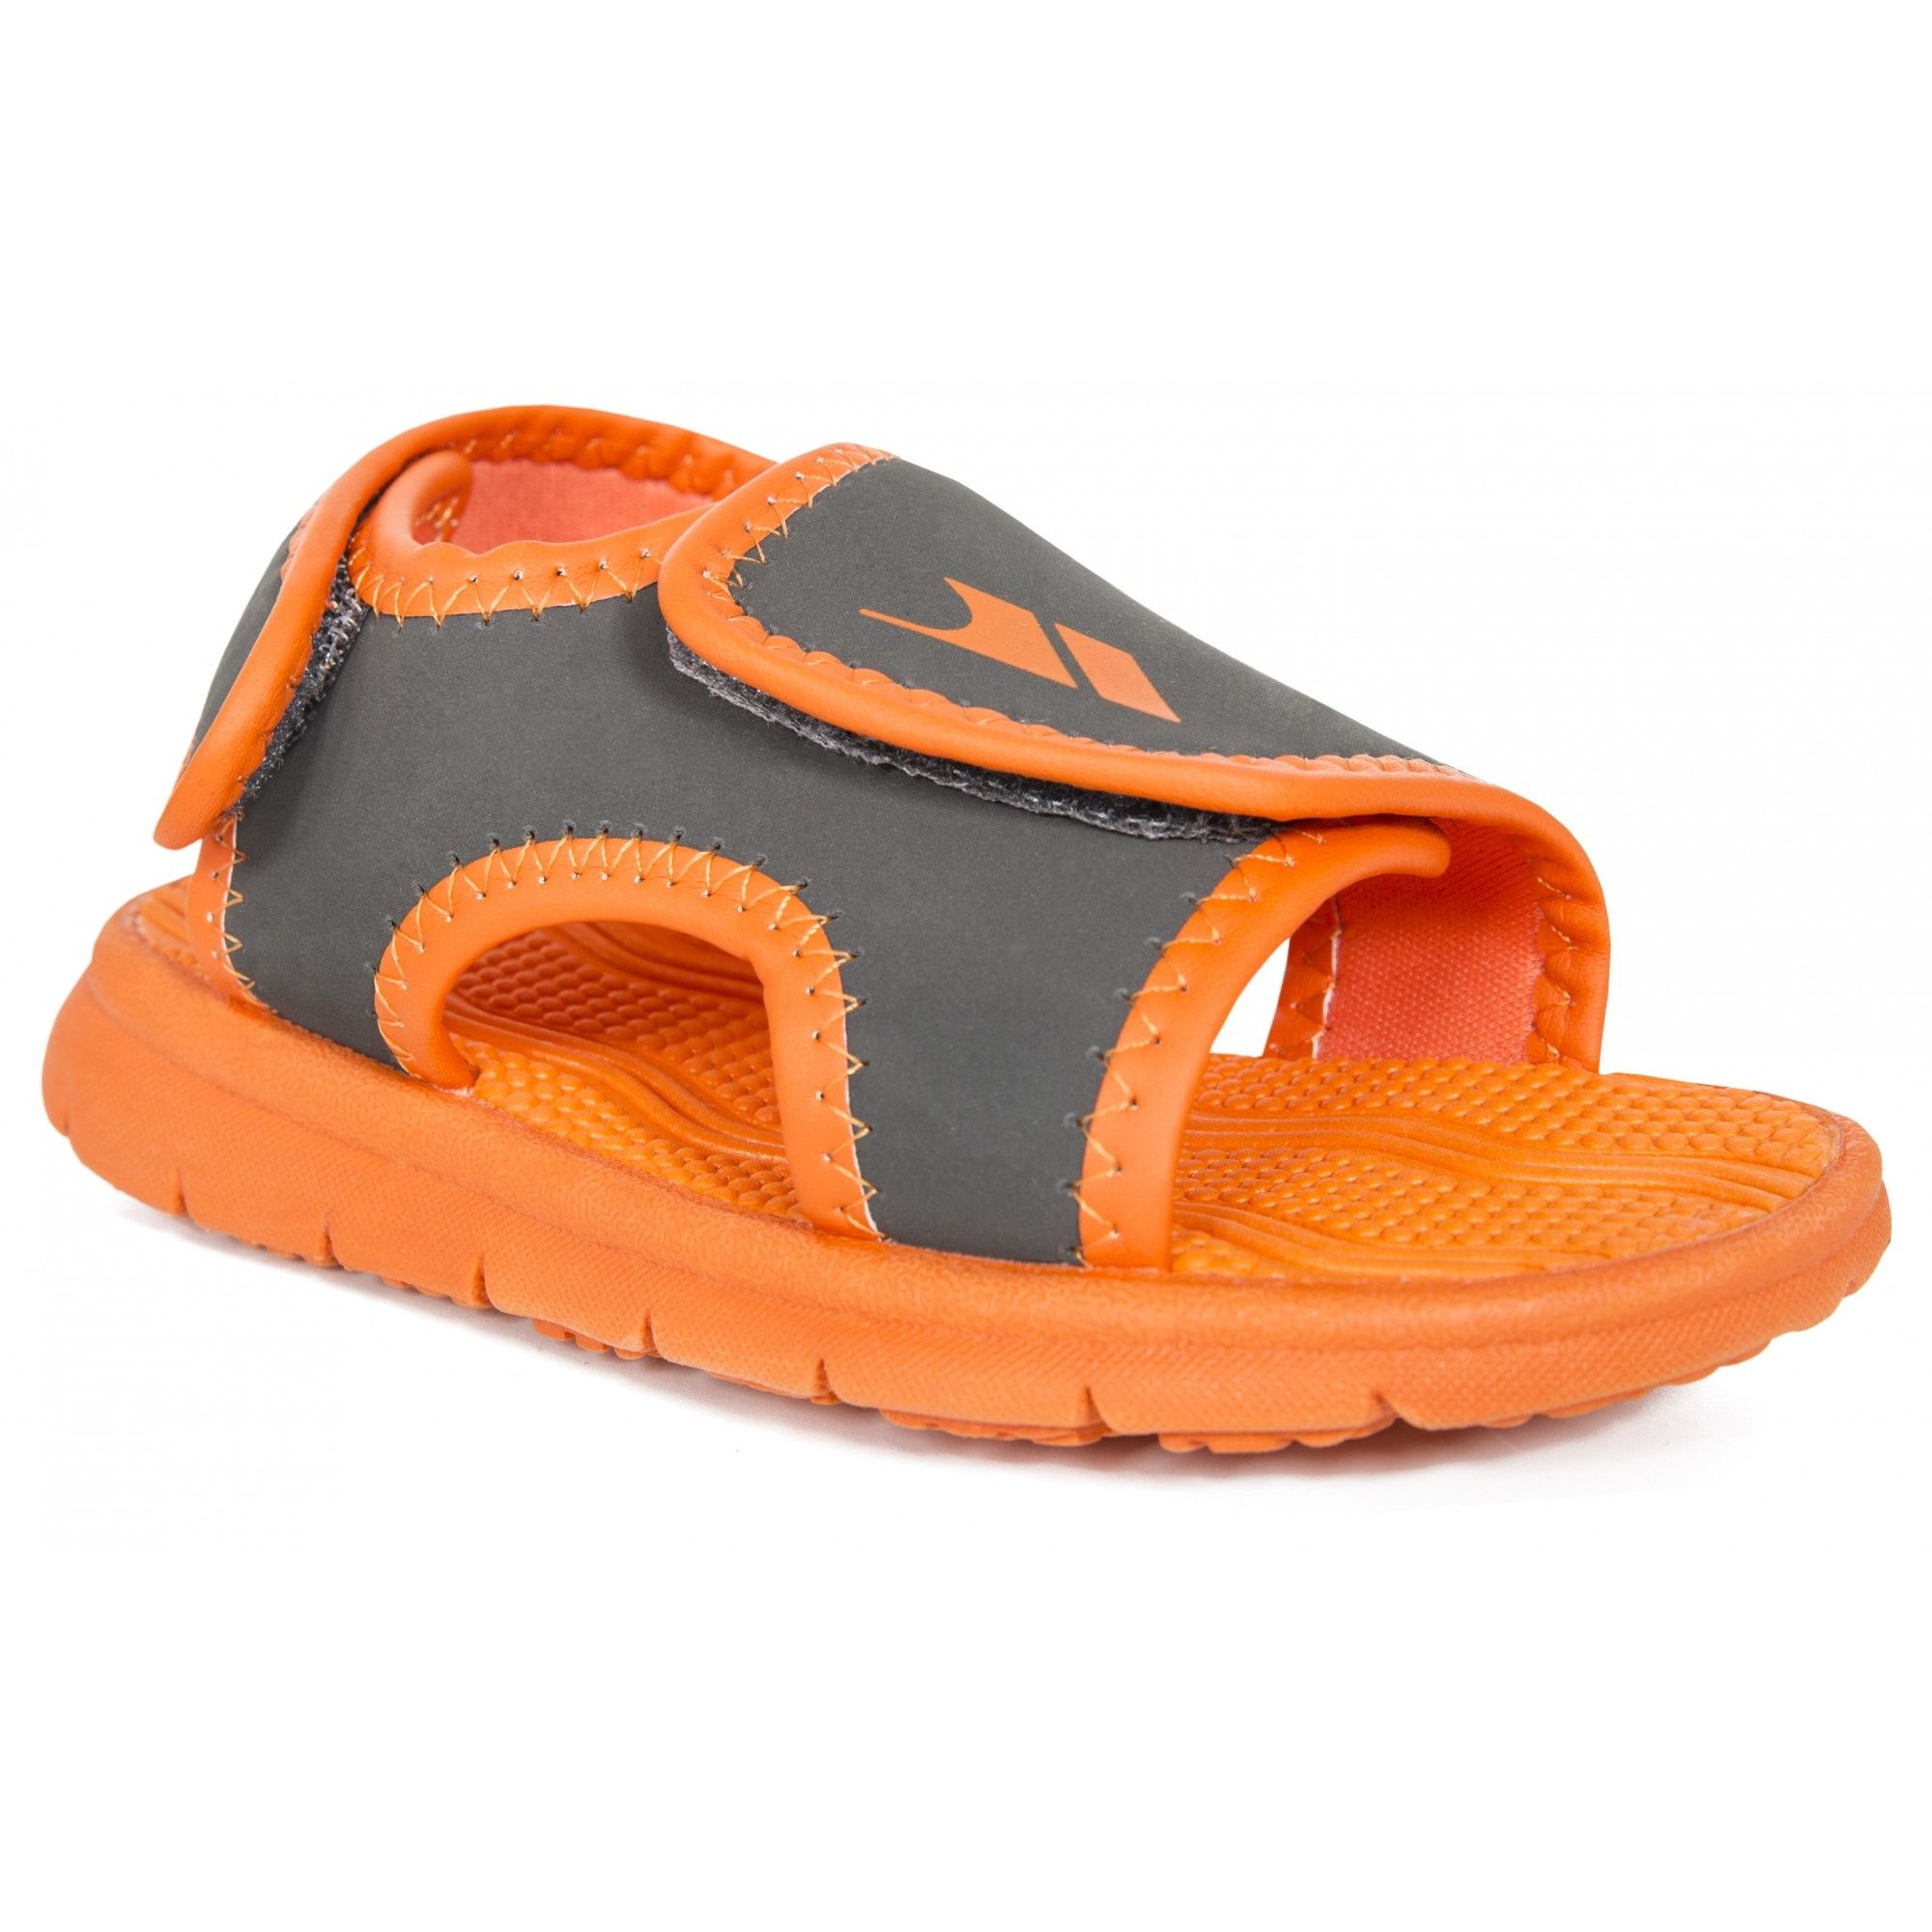 Kids sandal. Adjustable hook and loop straps. Cushioned and moulded footbed. Durable traction outsole. Upper: PU/Textile, Lining: Textile, Outsole: MD.